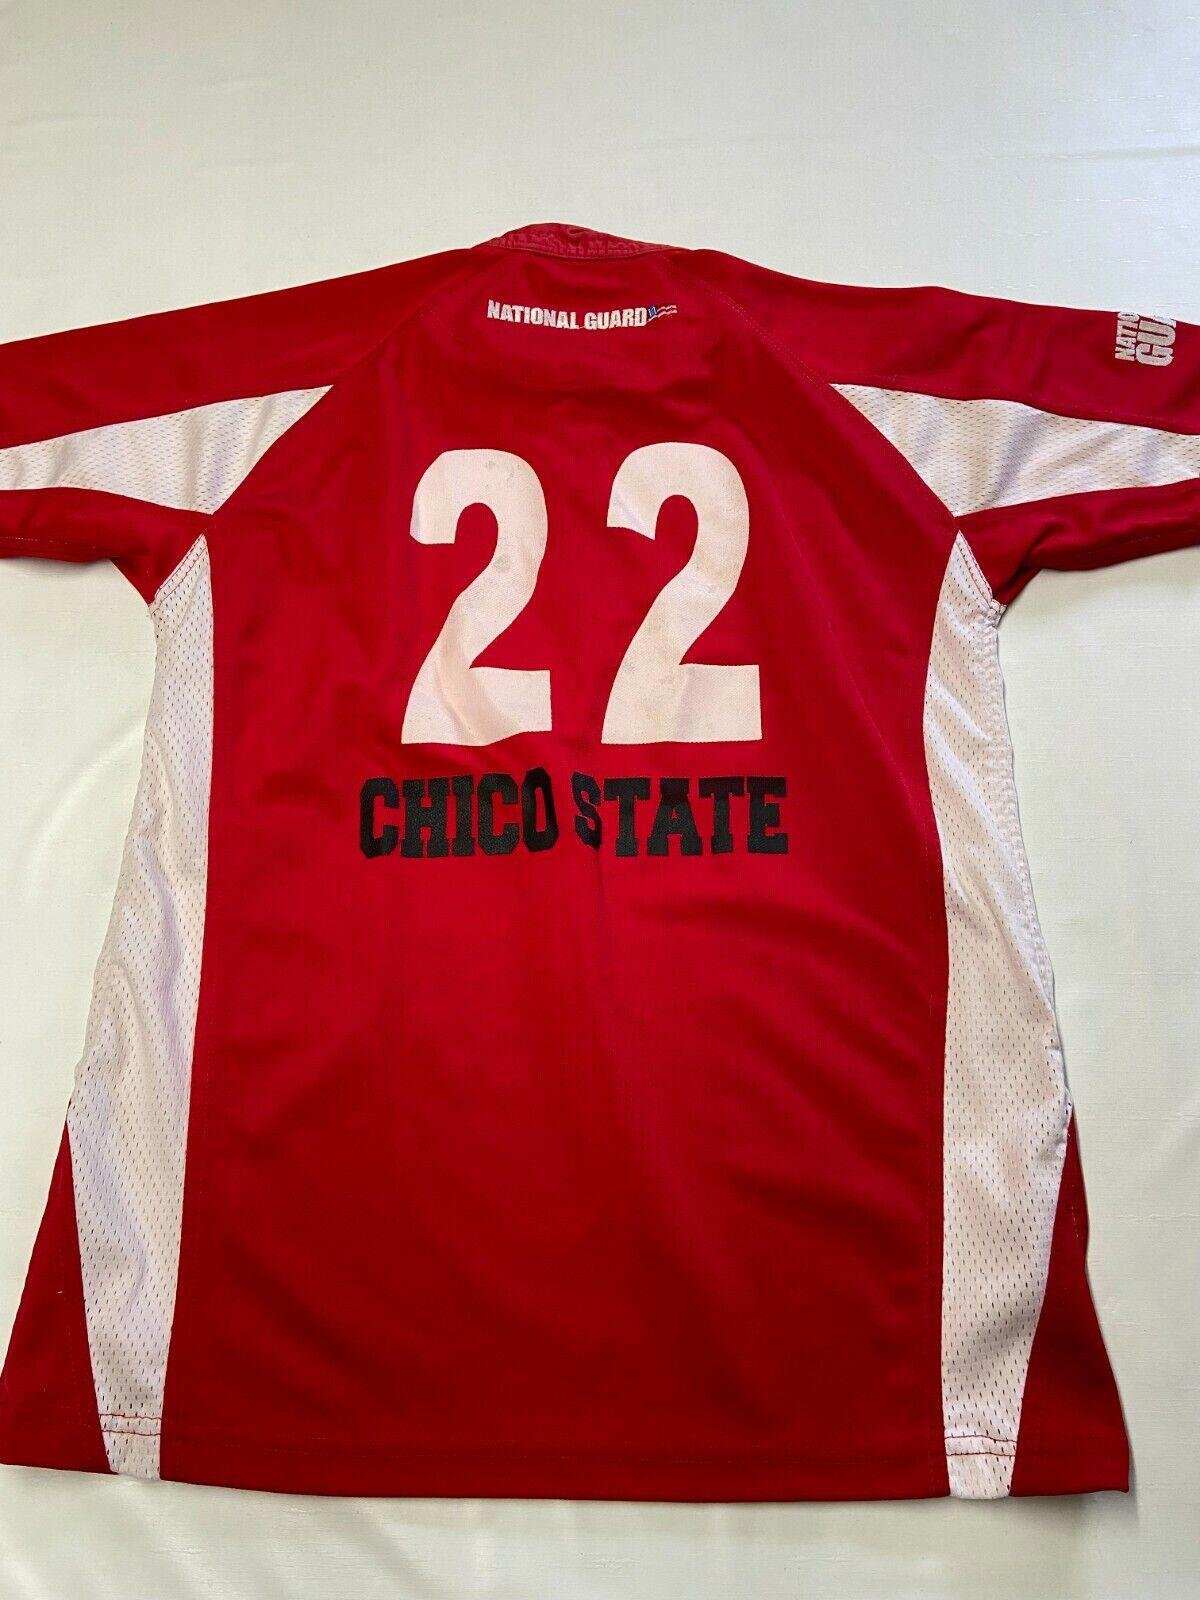 Mens KOOGA Red #22 Chico State Rugby Jersey Sz M DkvVcN3Vd